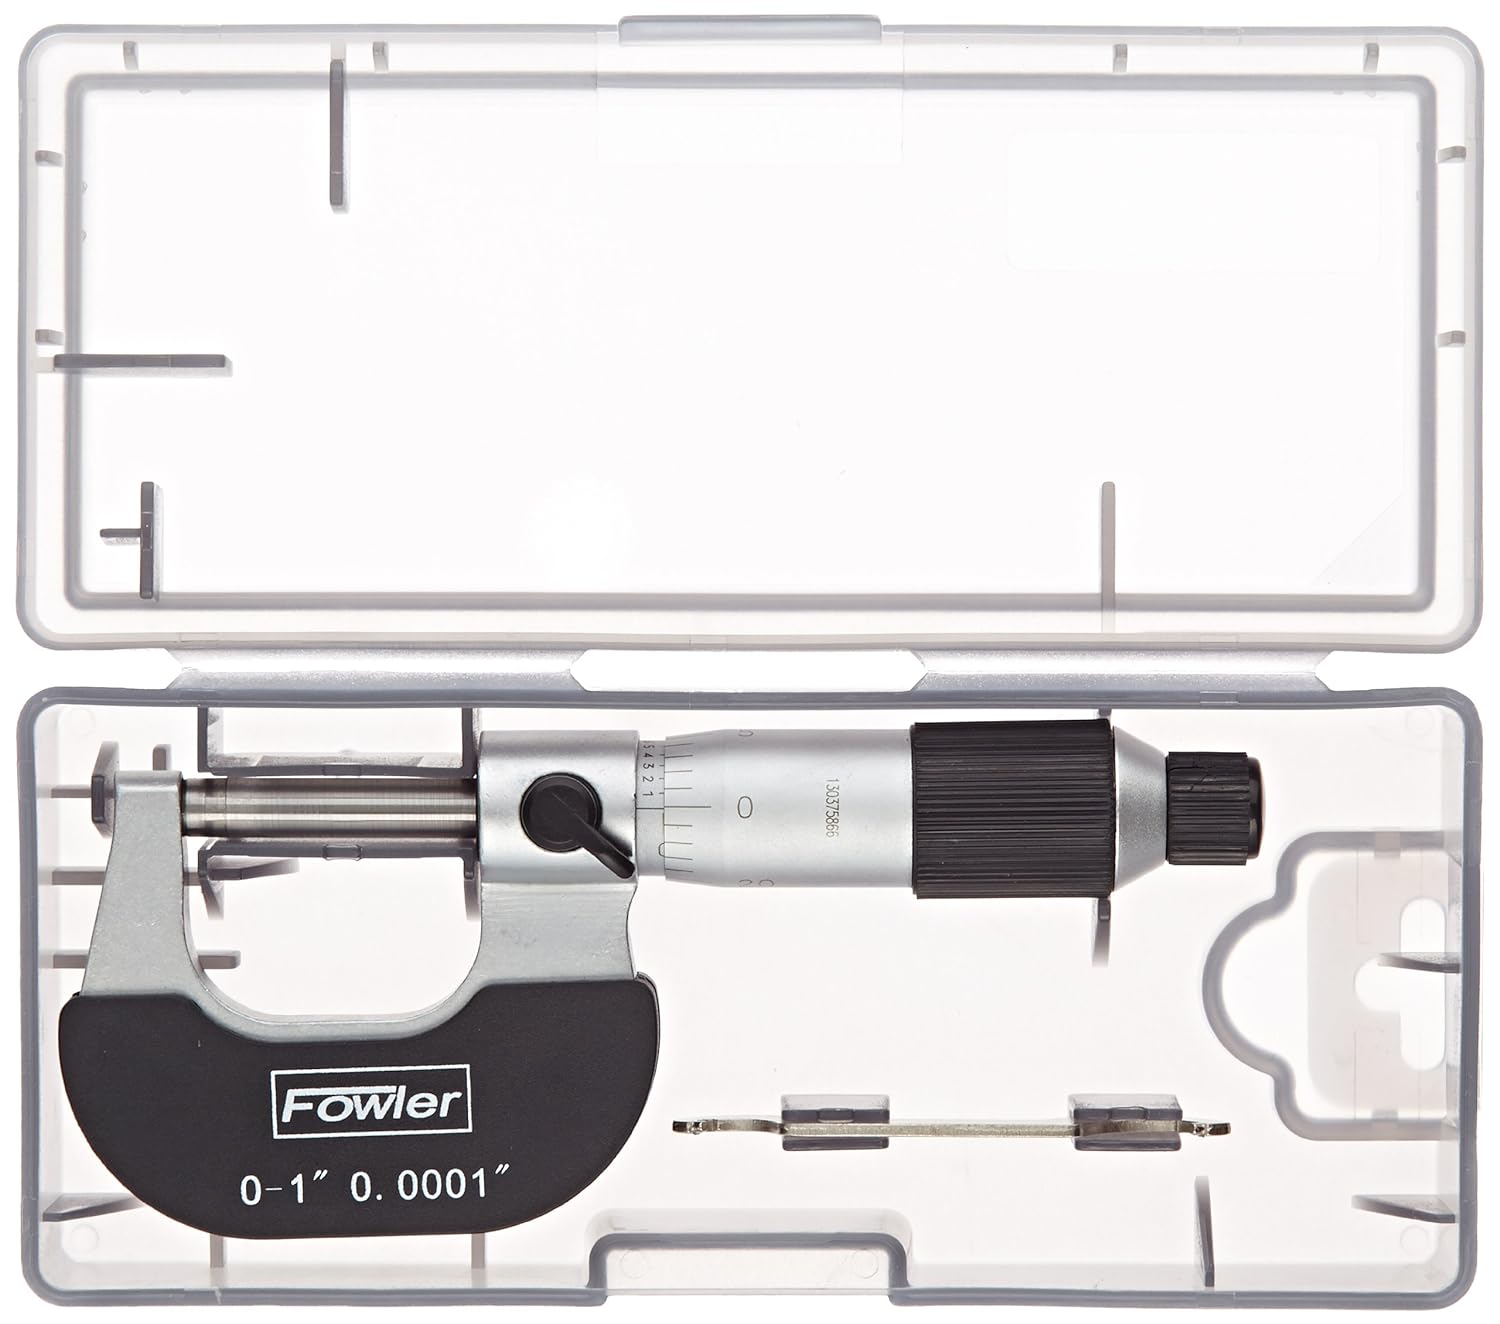 0-1" Swiss Style Micrometer by FOWLER 2